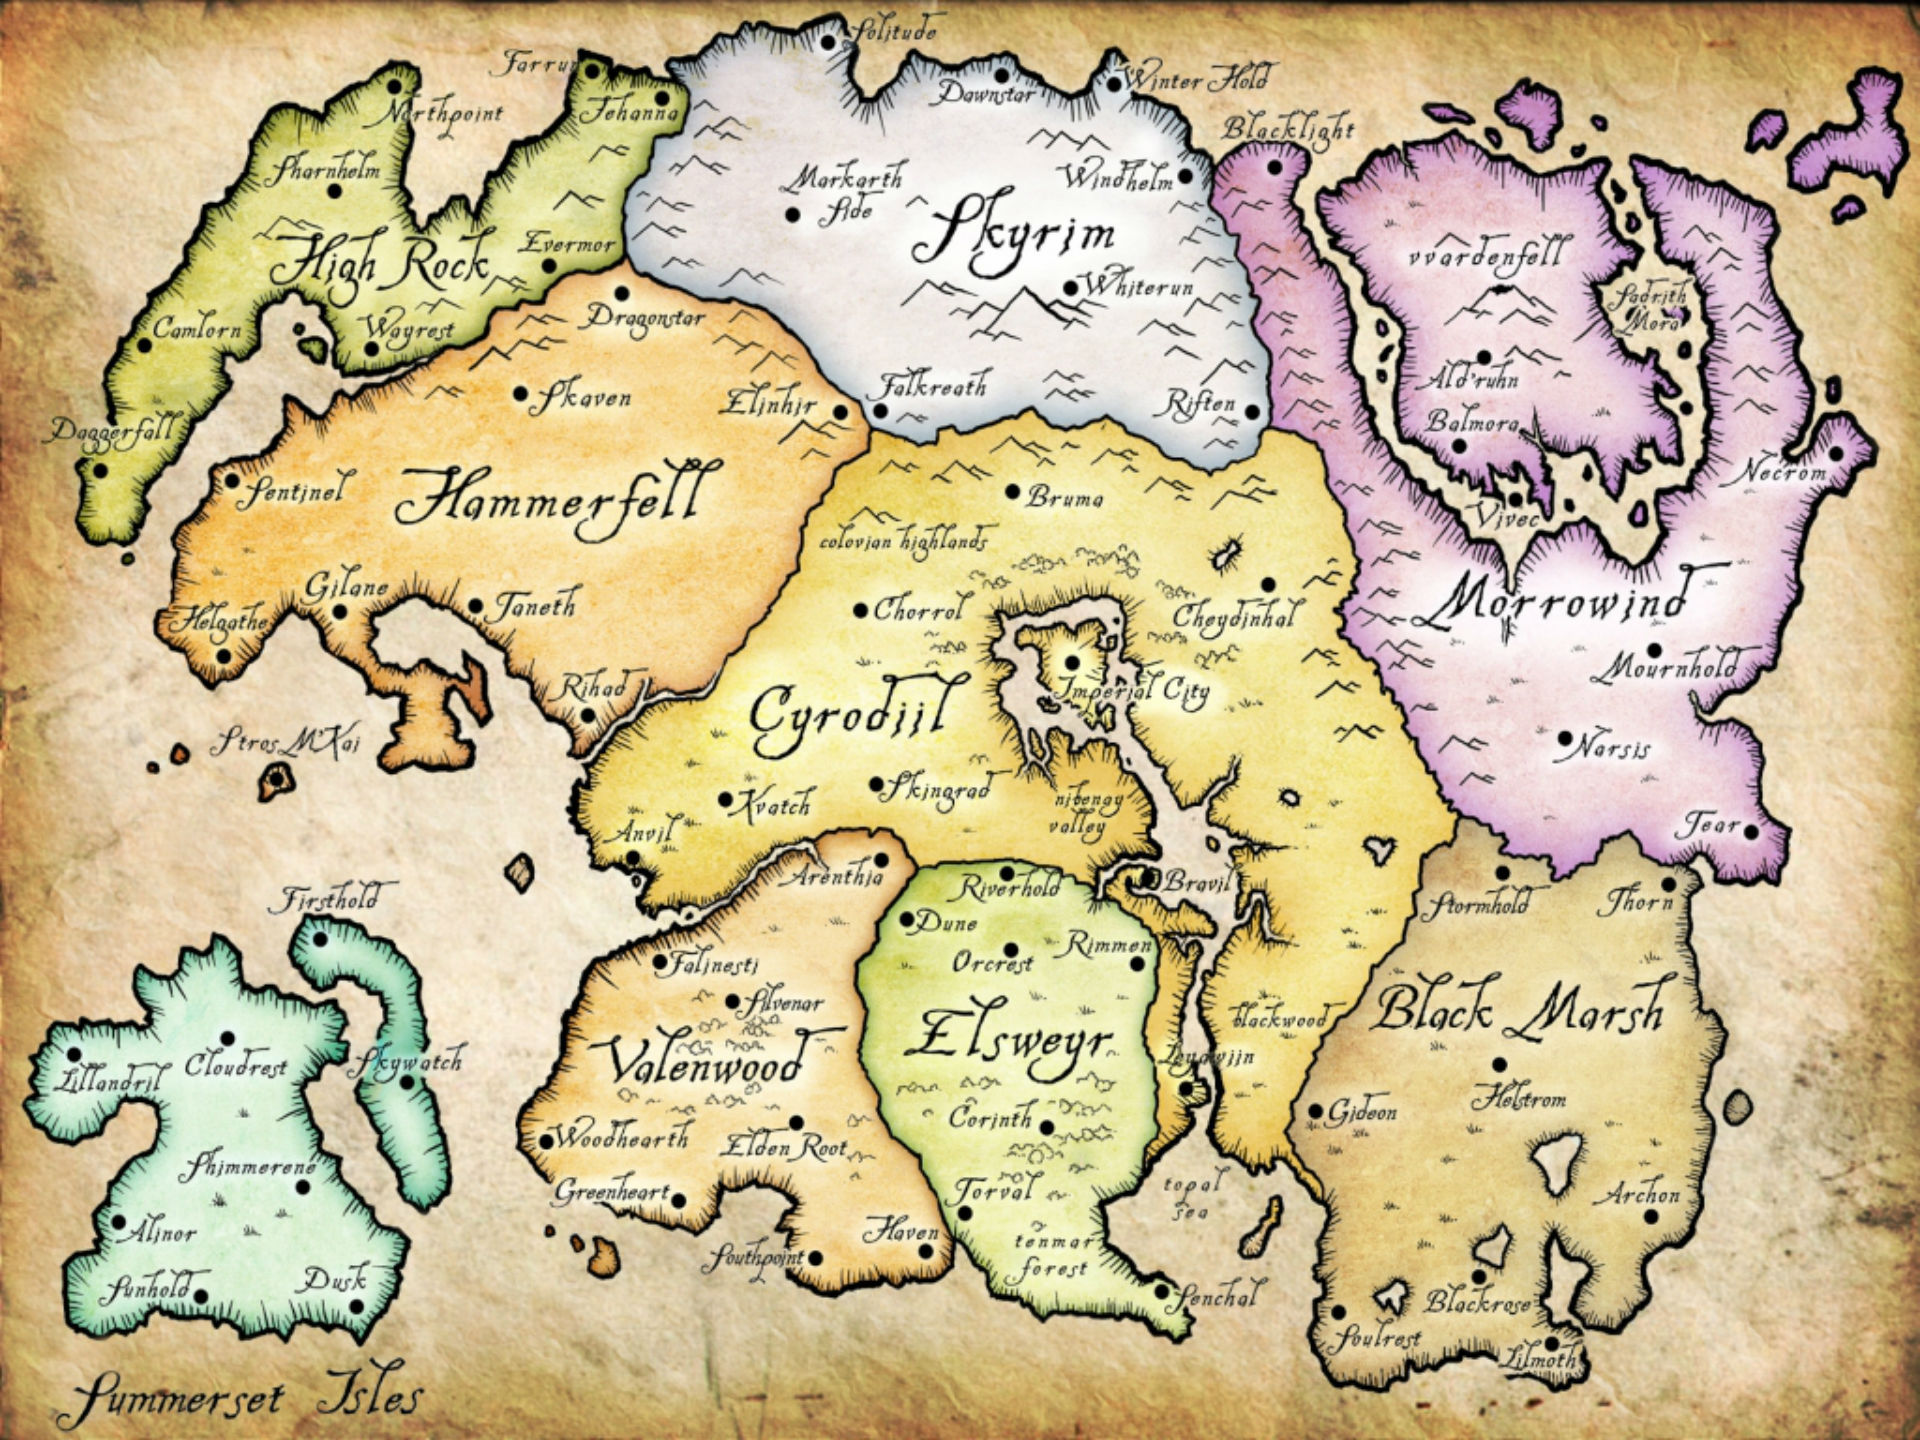 The Elder Scrolls 6 release date speculation and rumors: A shot of a 2D map of Tamriel, and all its regions